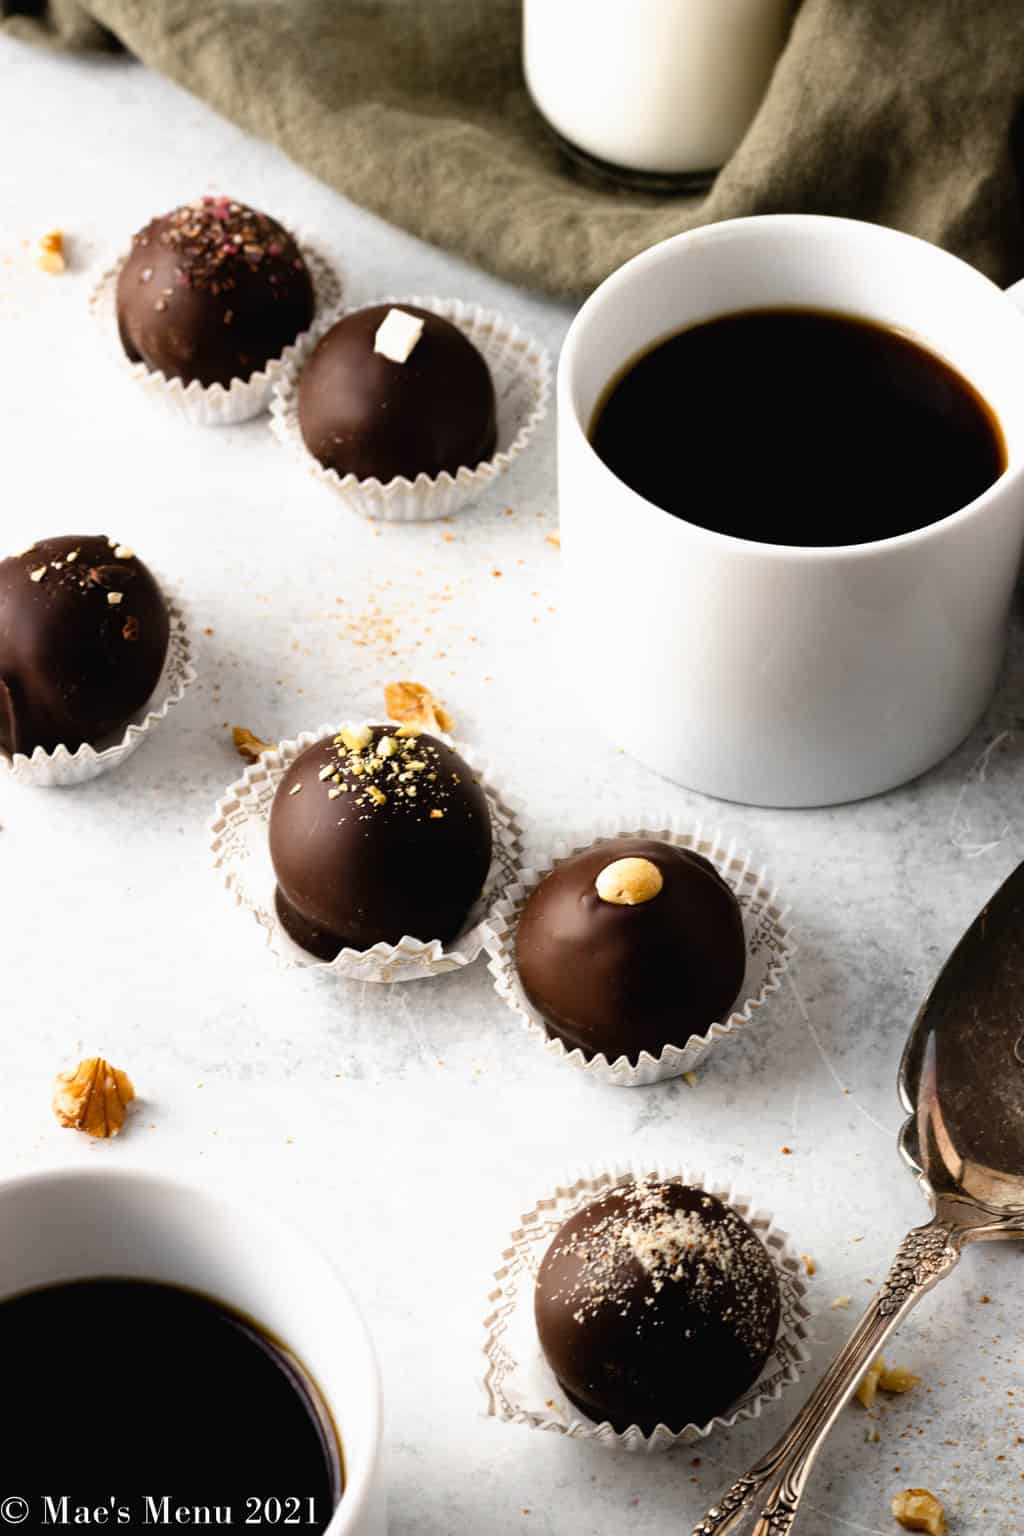 Dark chocolate truffles on a concrete counter with a cup of coffee, serving spoon, and bottle of milk.